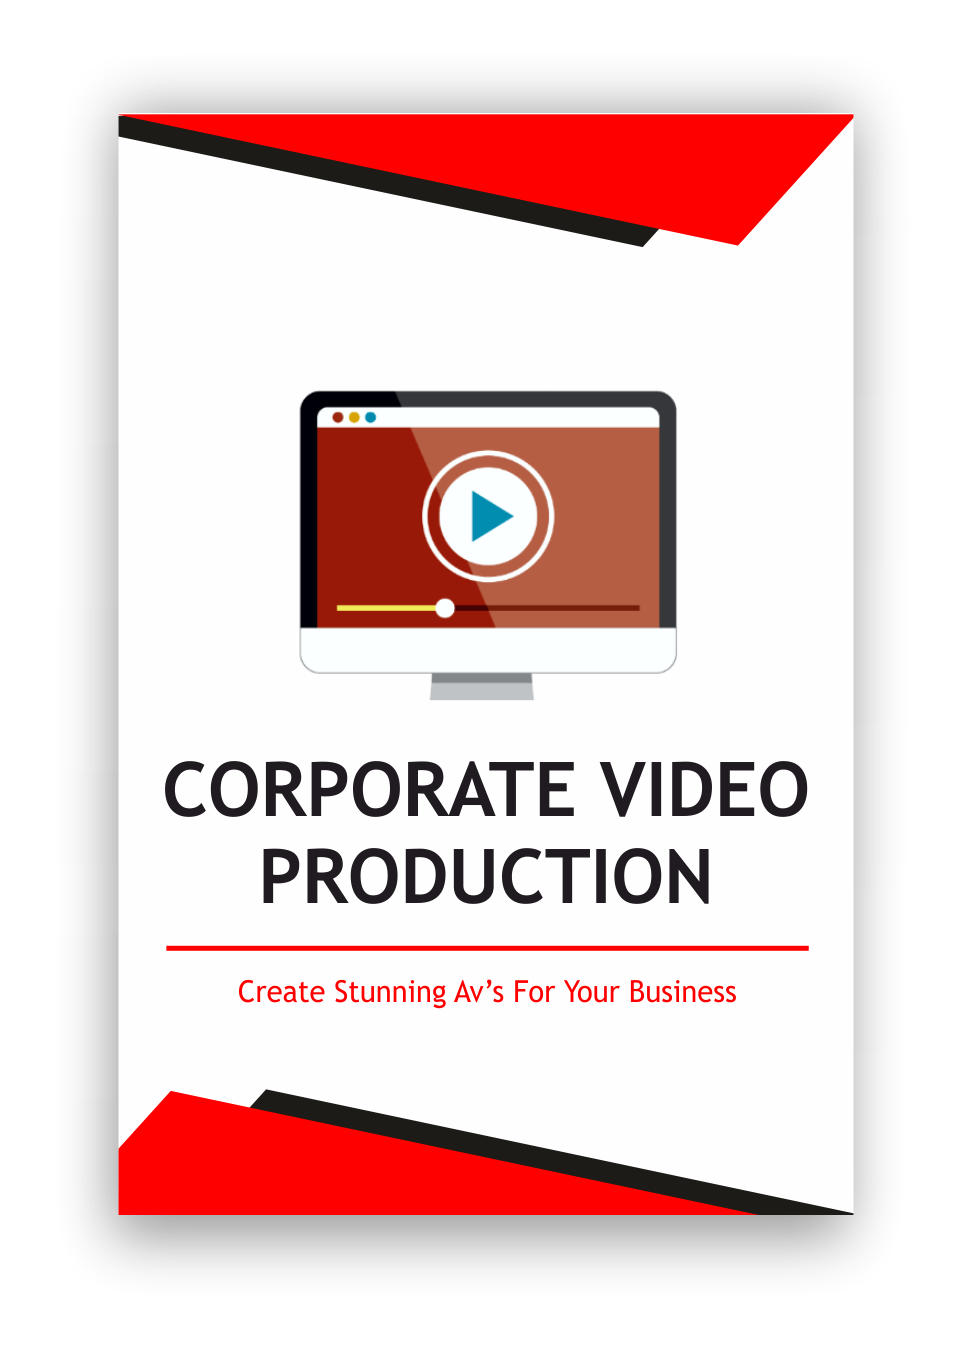 COPORATE VIDEO PRODUCTION